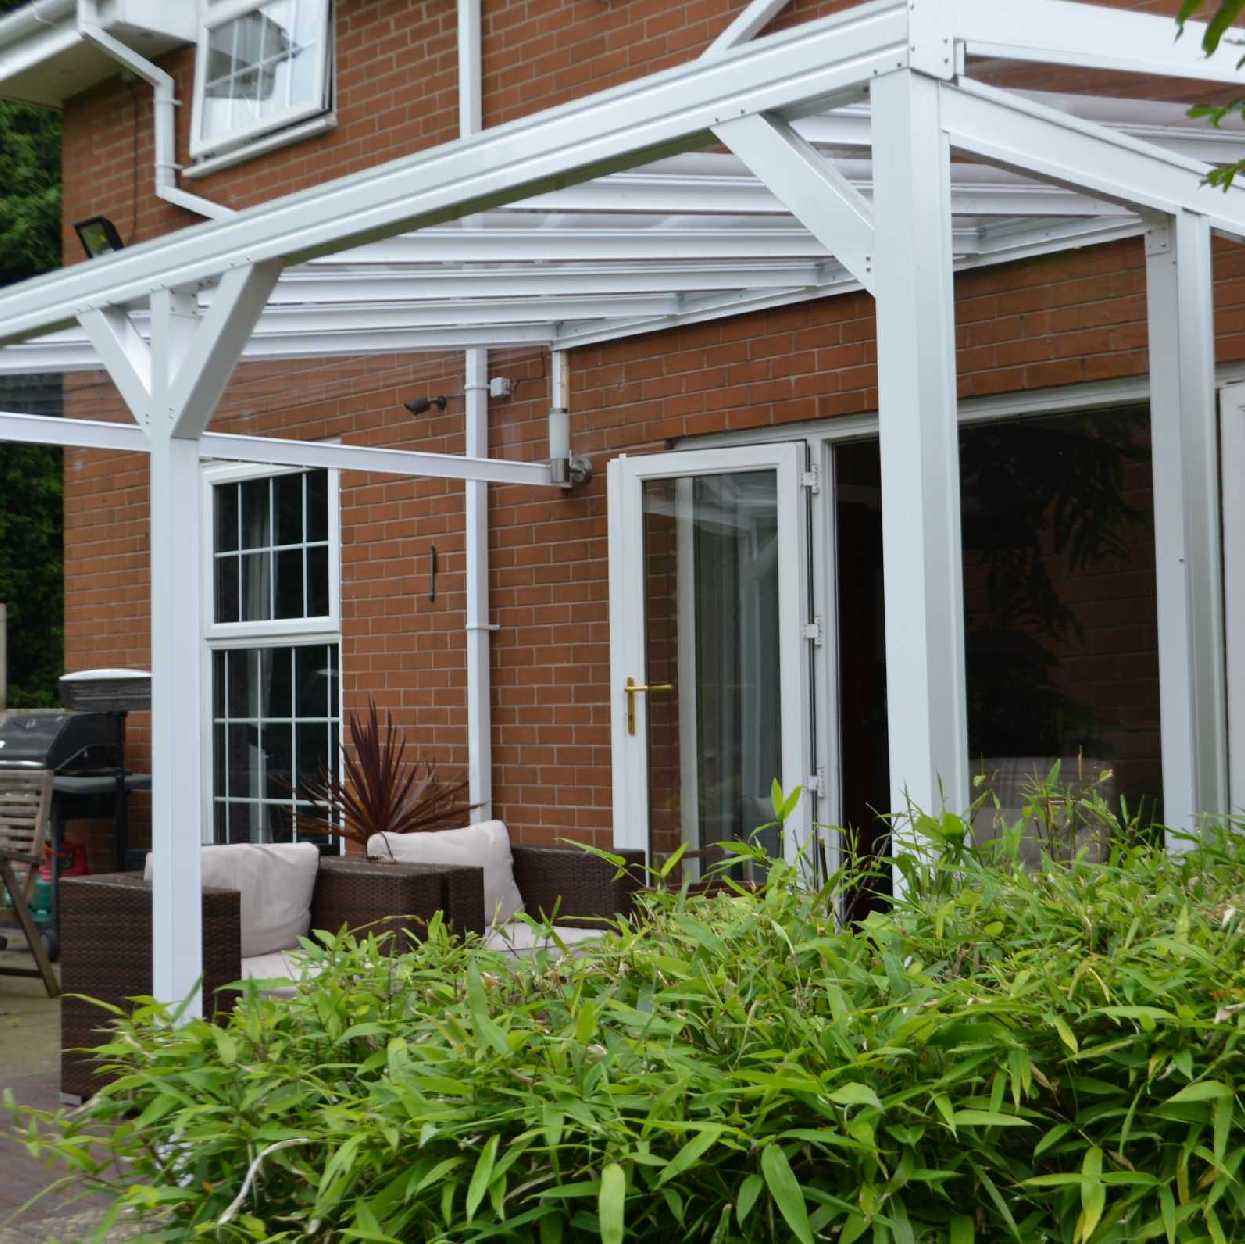 Omega Smart Lean-To Canopy, White UNGLAZED for 6mm Glazing - 10.5m (W) x 2.0m (P), (5) Supporting Posts from Omega Build